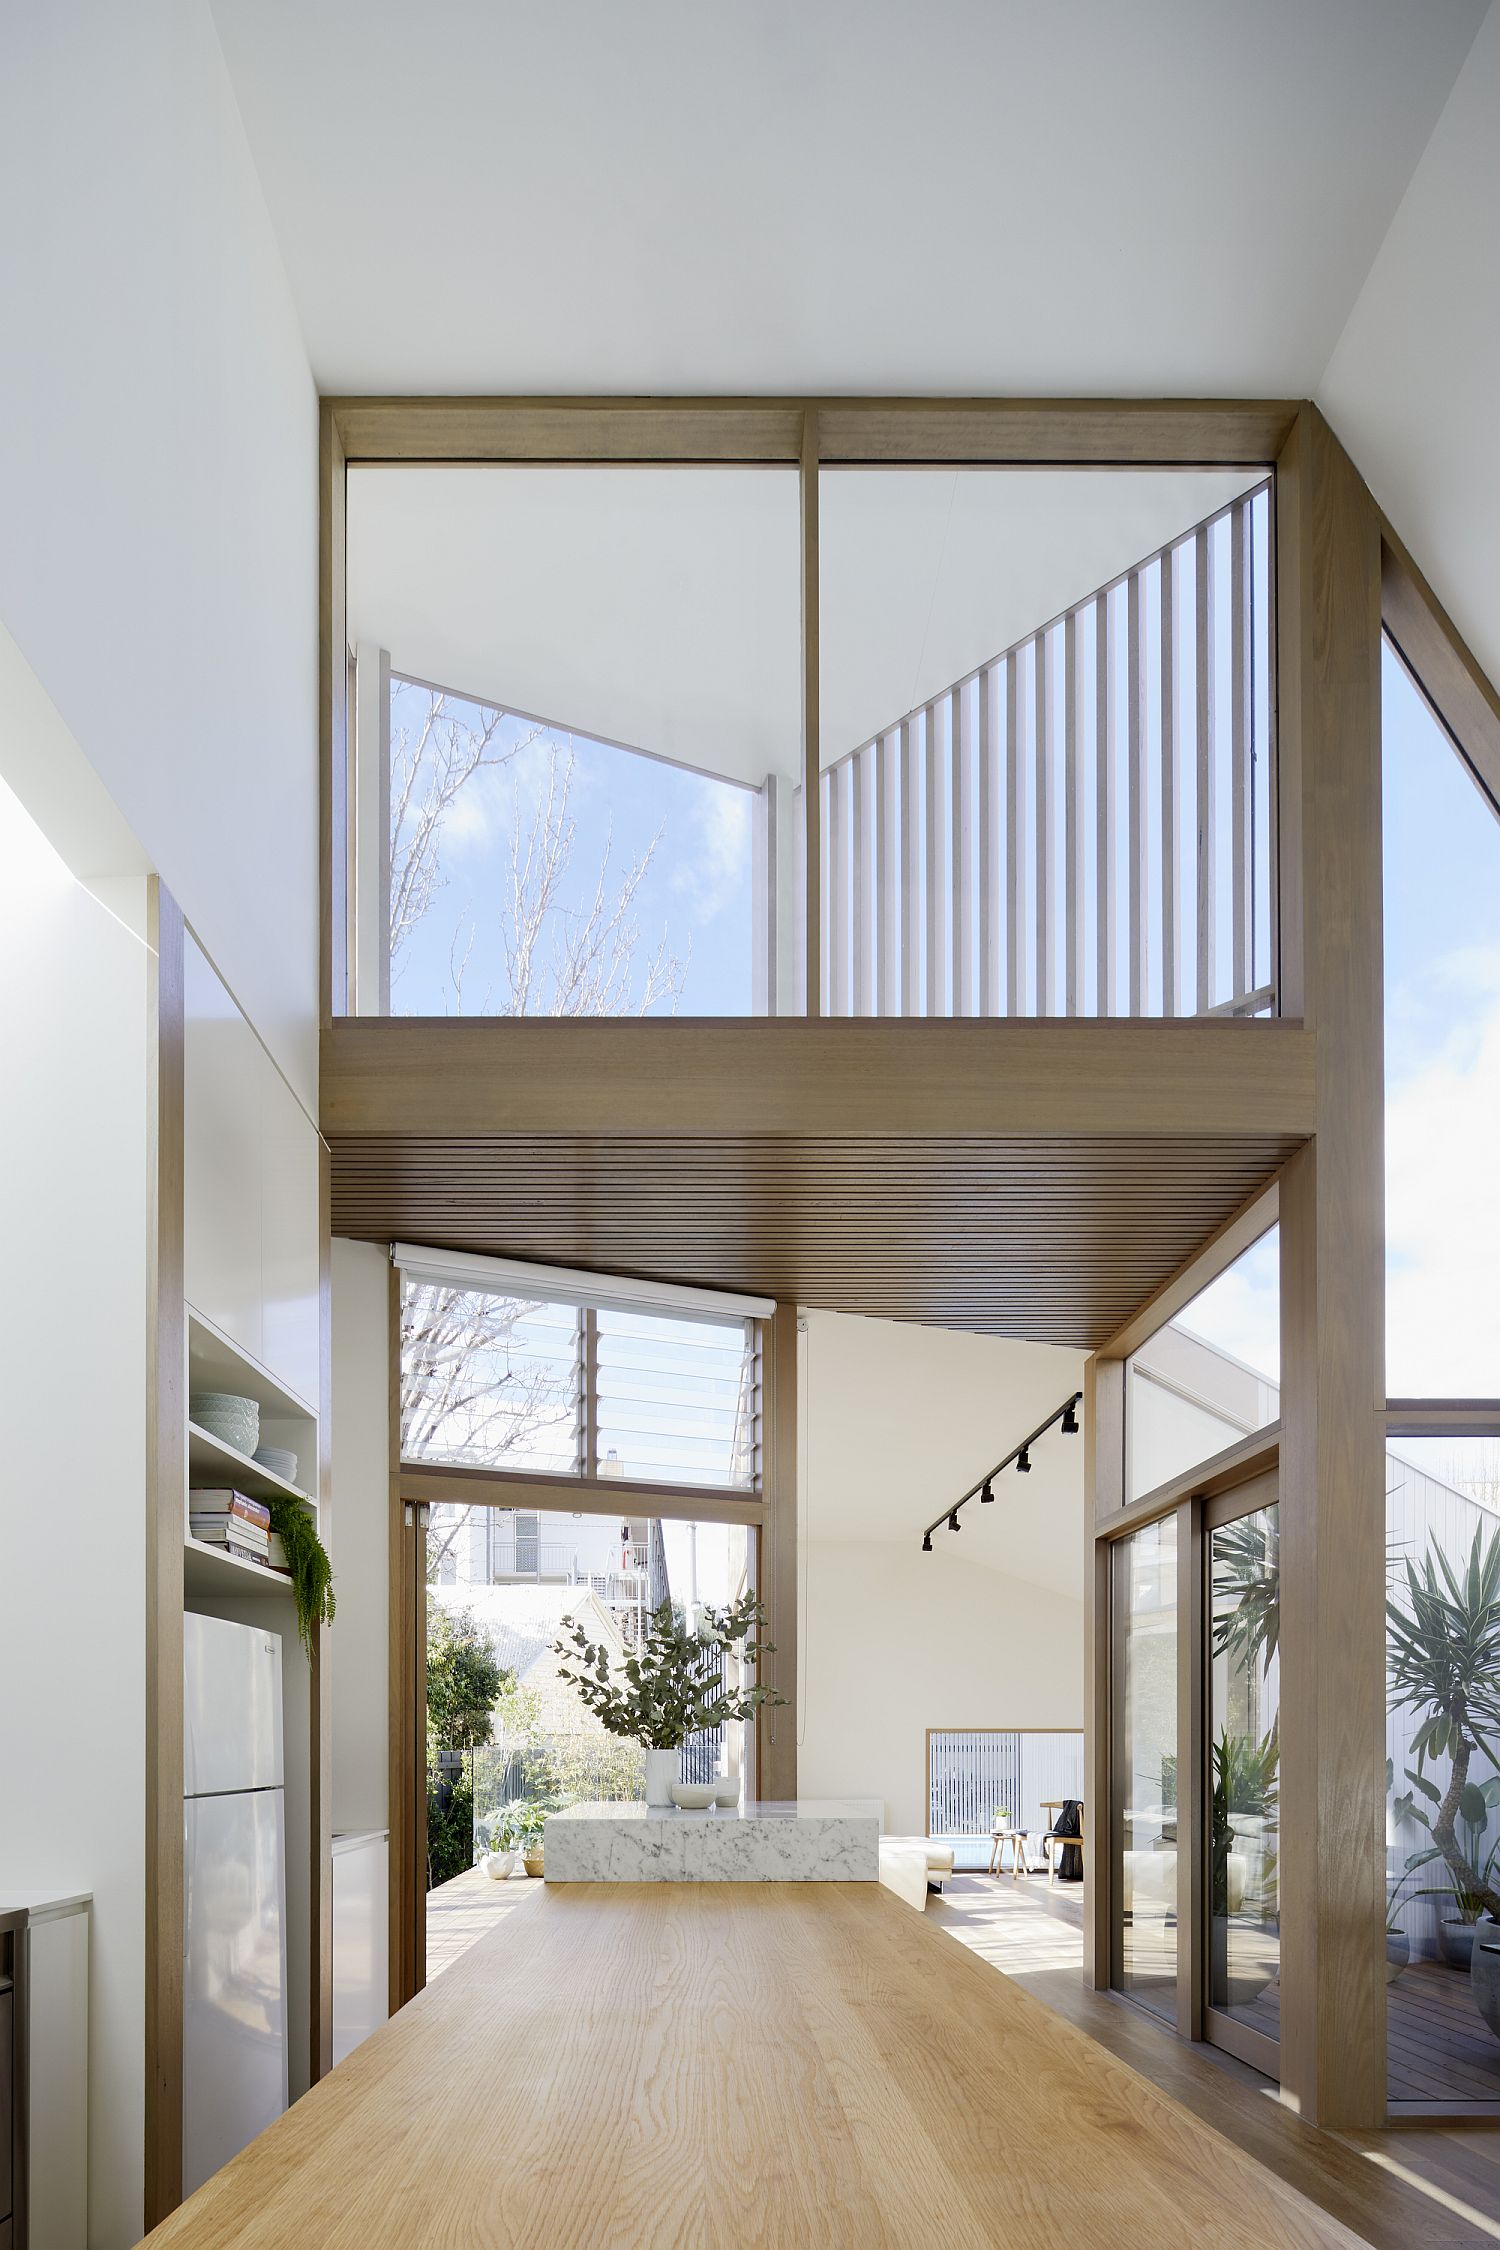 Windows and doors in glass bring in ample natural light